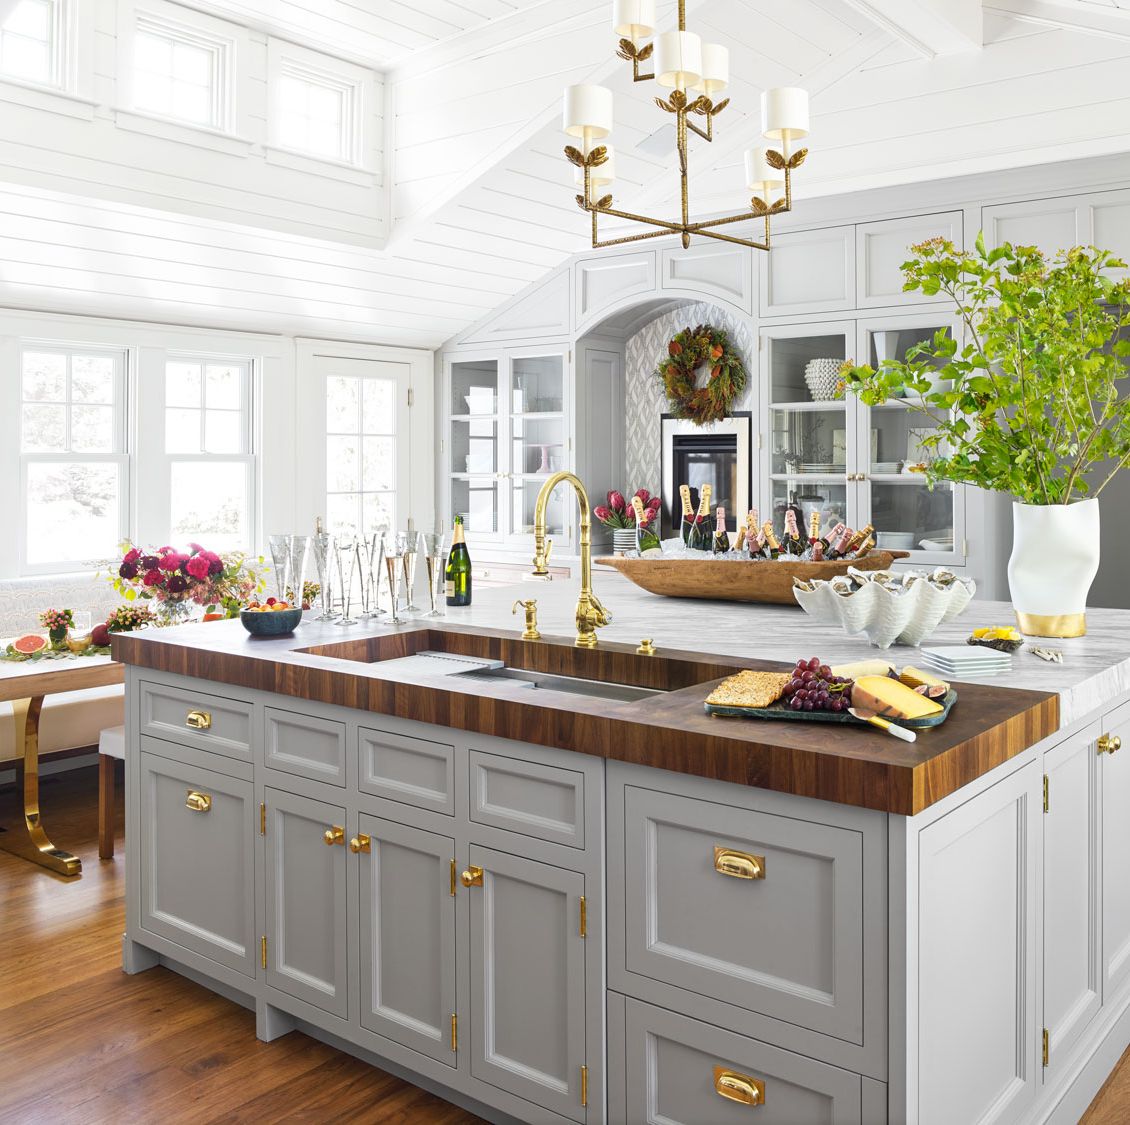 A luxurious white and blue kitchen with gold hardware, Bosch and